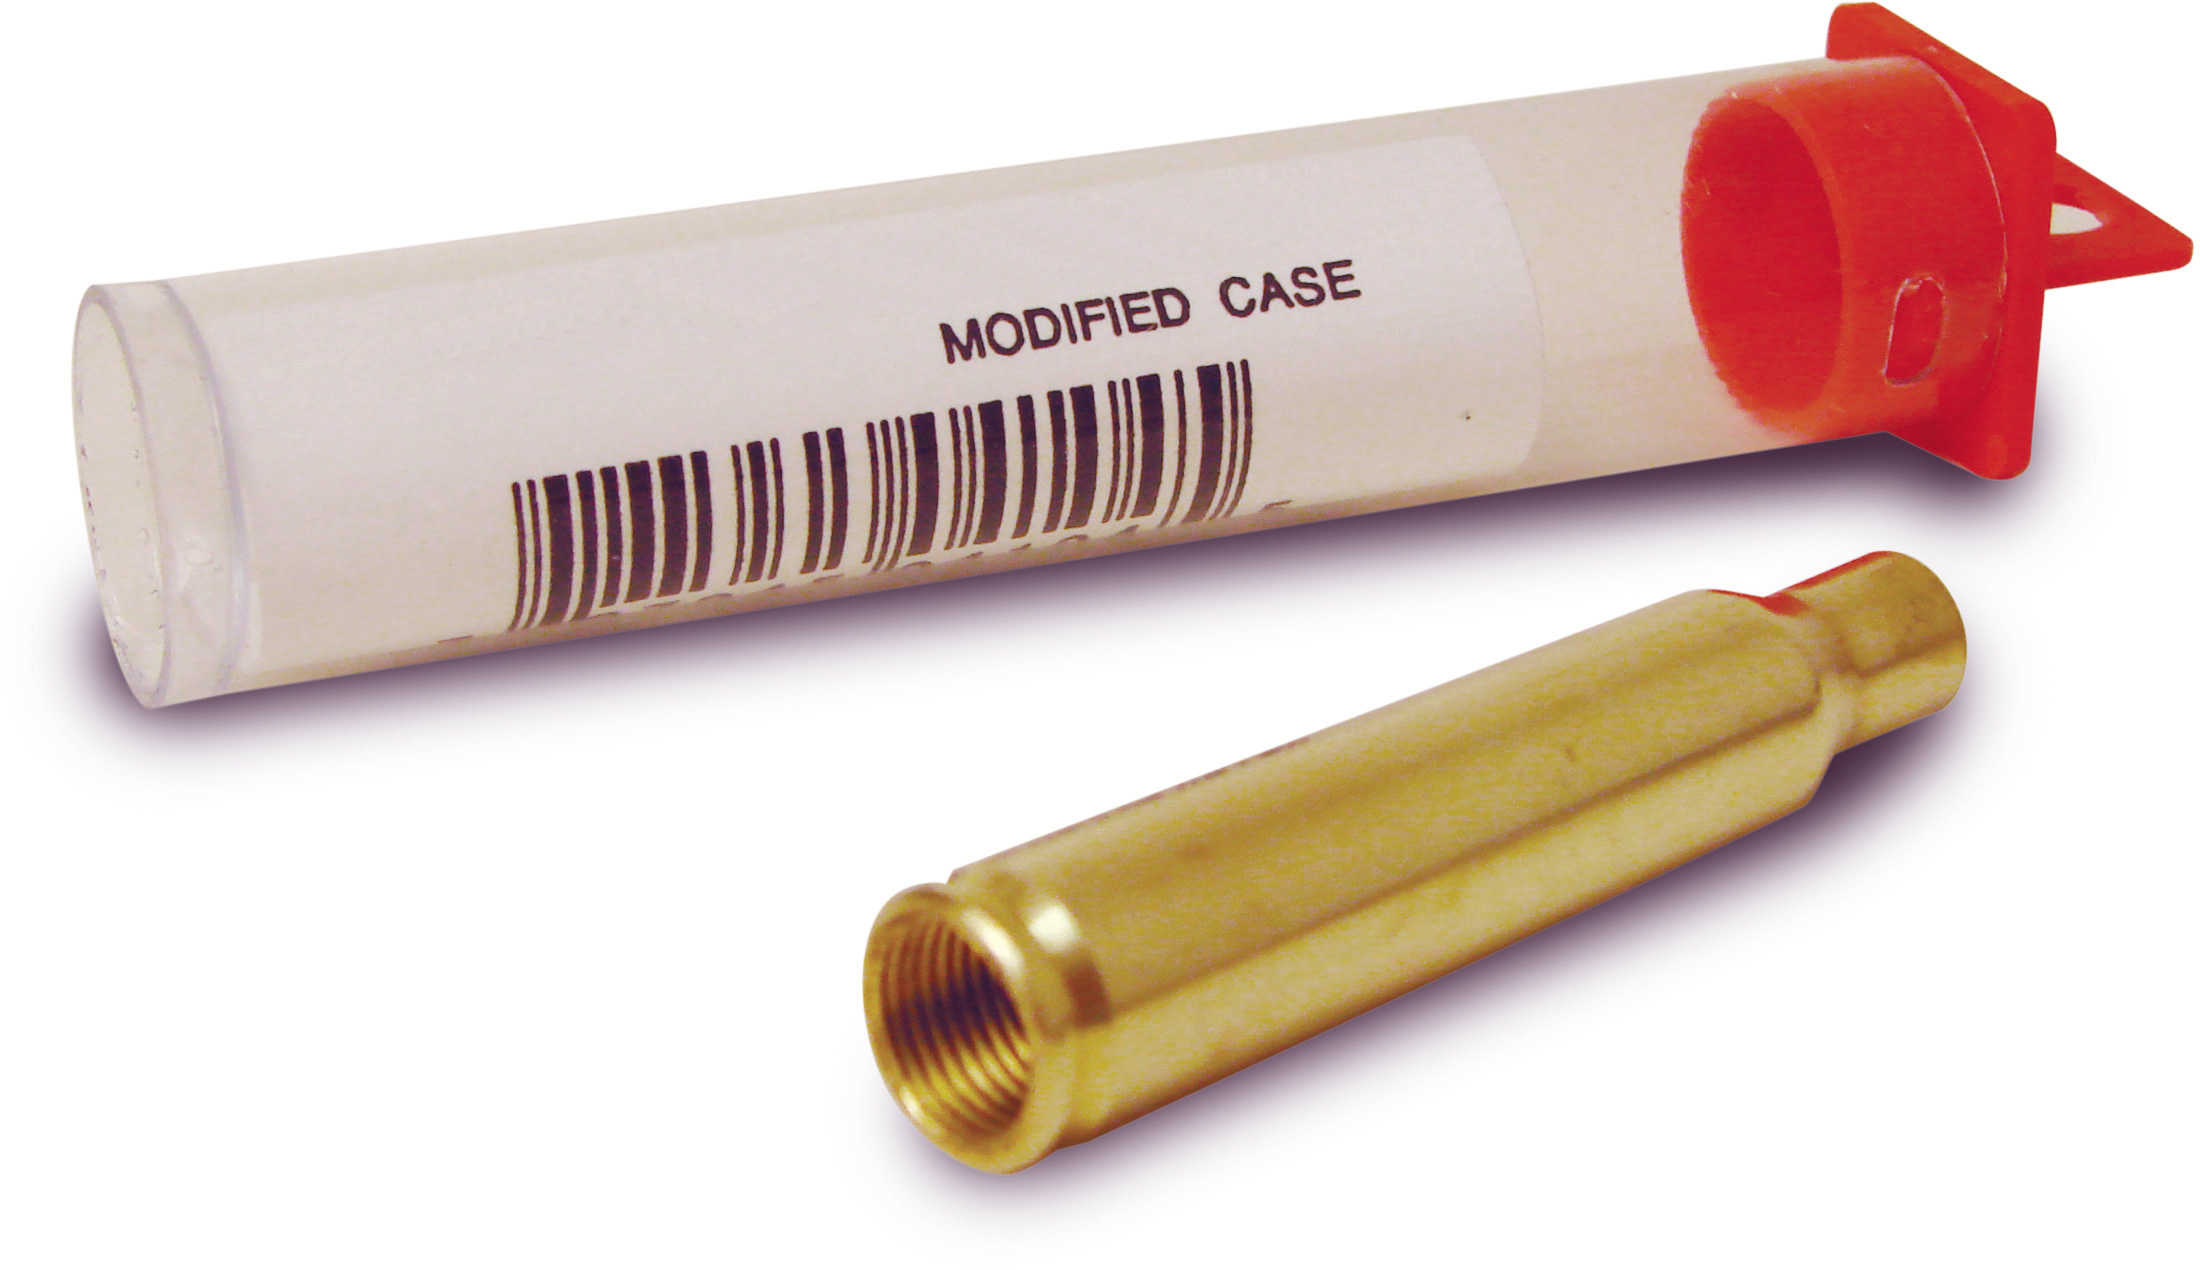 Hornady Lock-N-Load 7.62 x 39 .308-.311 Modified Case, 1 Count Md: A762